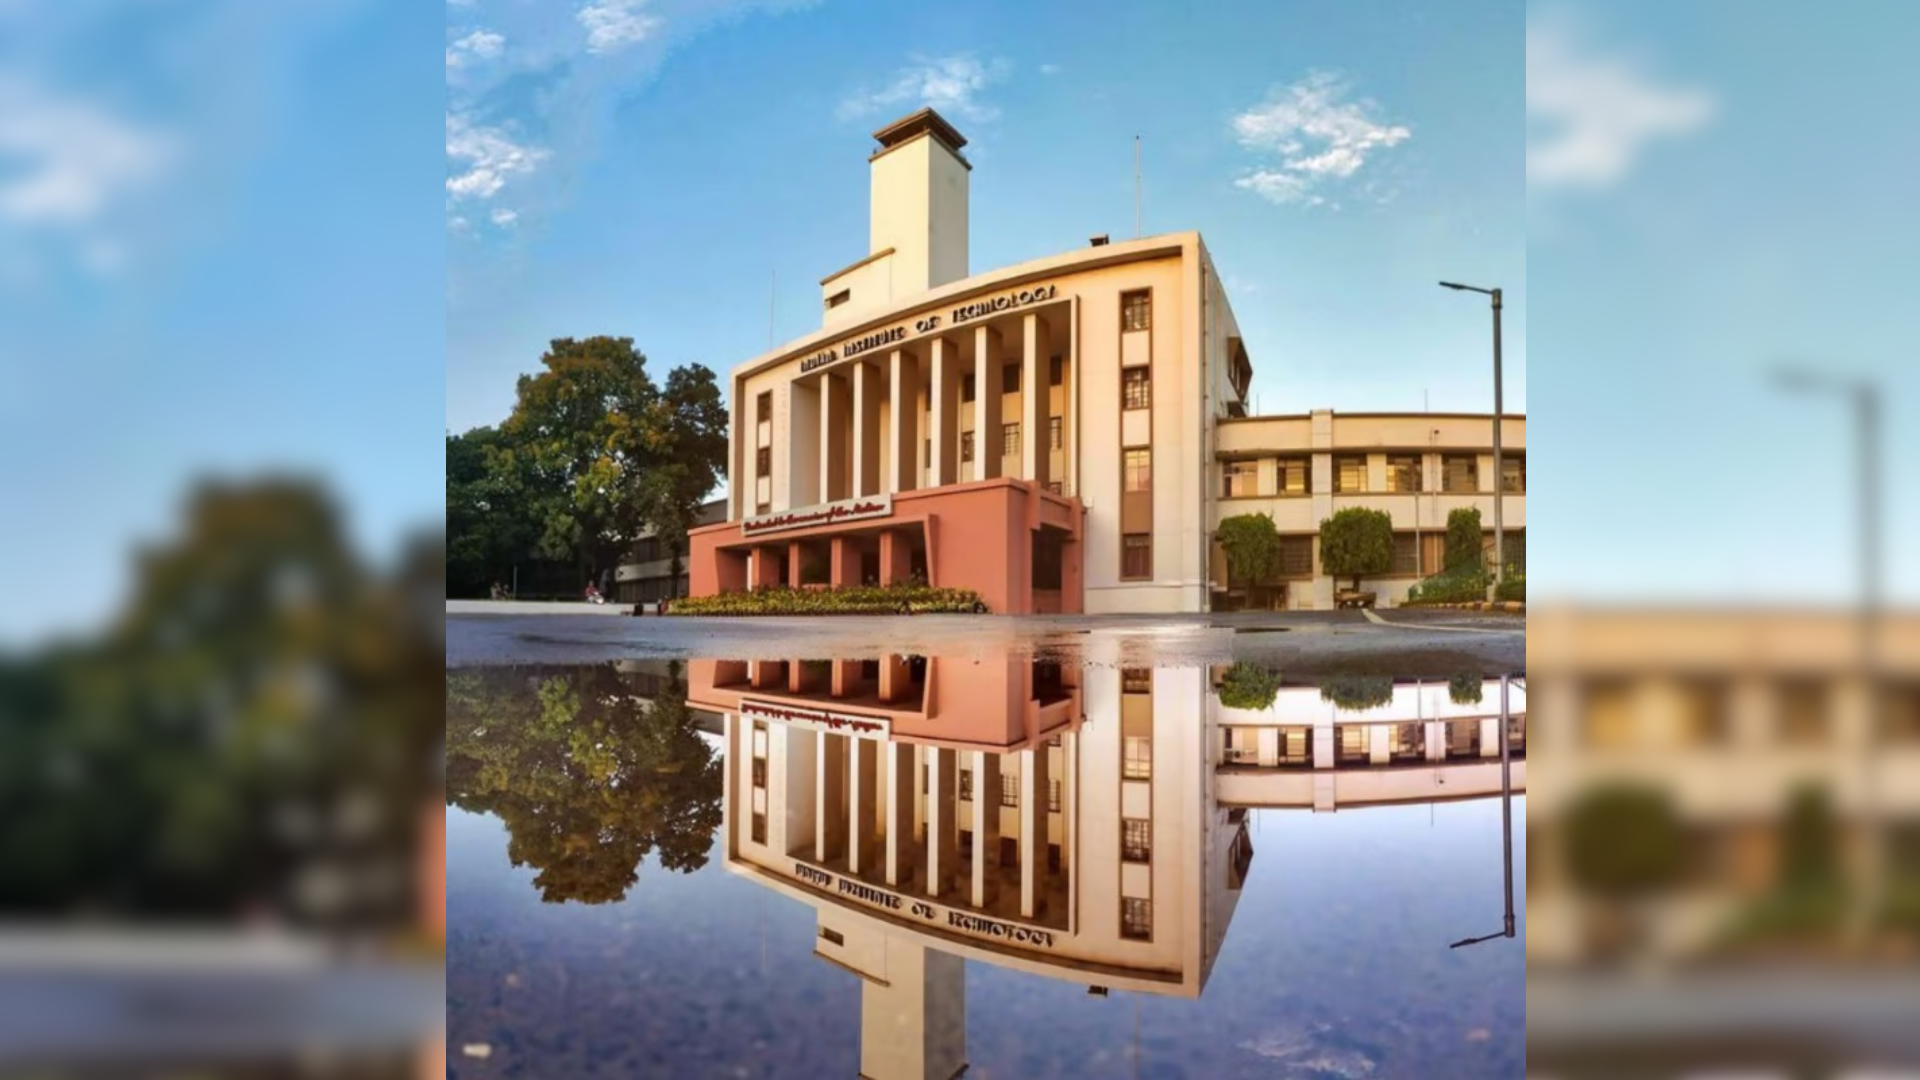 IIT Kharagpur’s Director Position Offers A Salary Of Rs 2.25 lakh: Details revealed